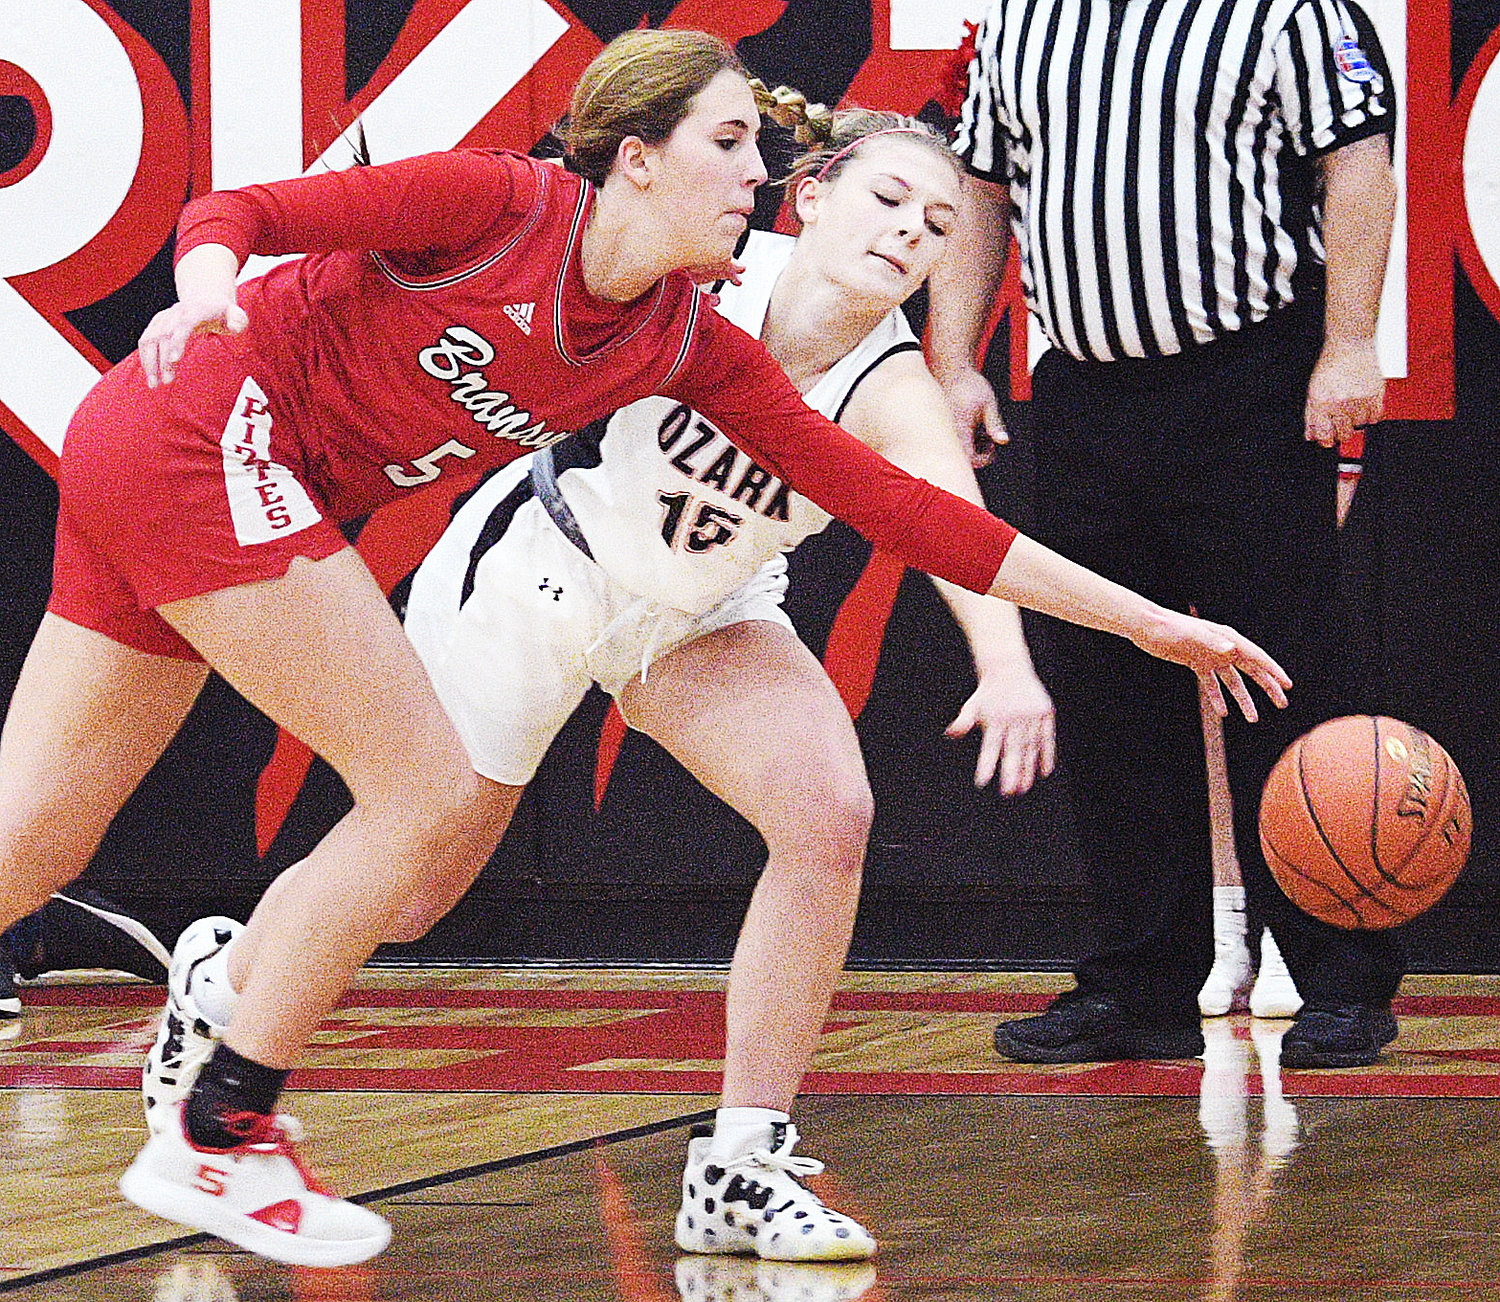 OZARK’S LYLA WATSON and a Branson player both reach for a loose ball.